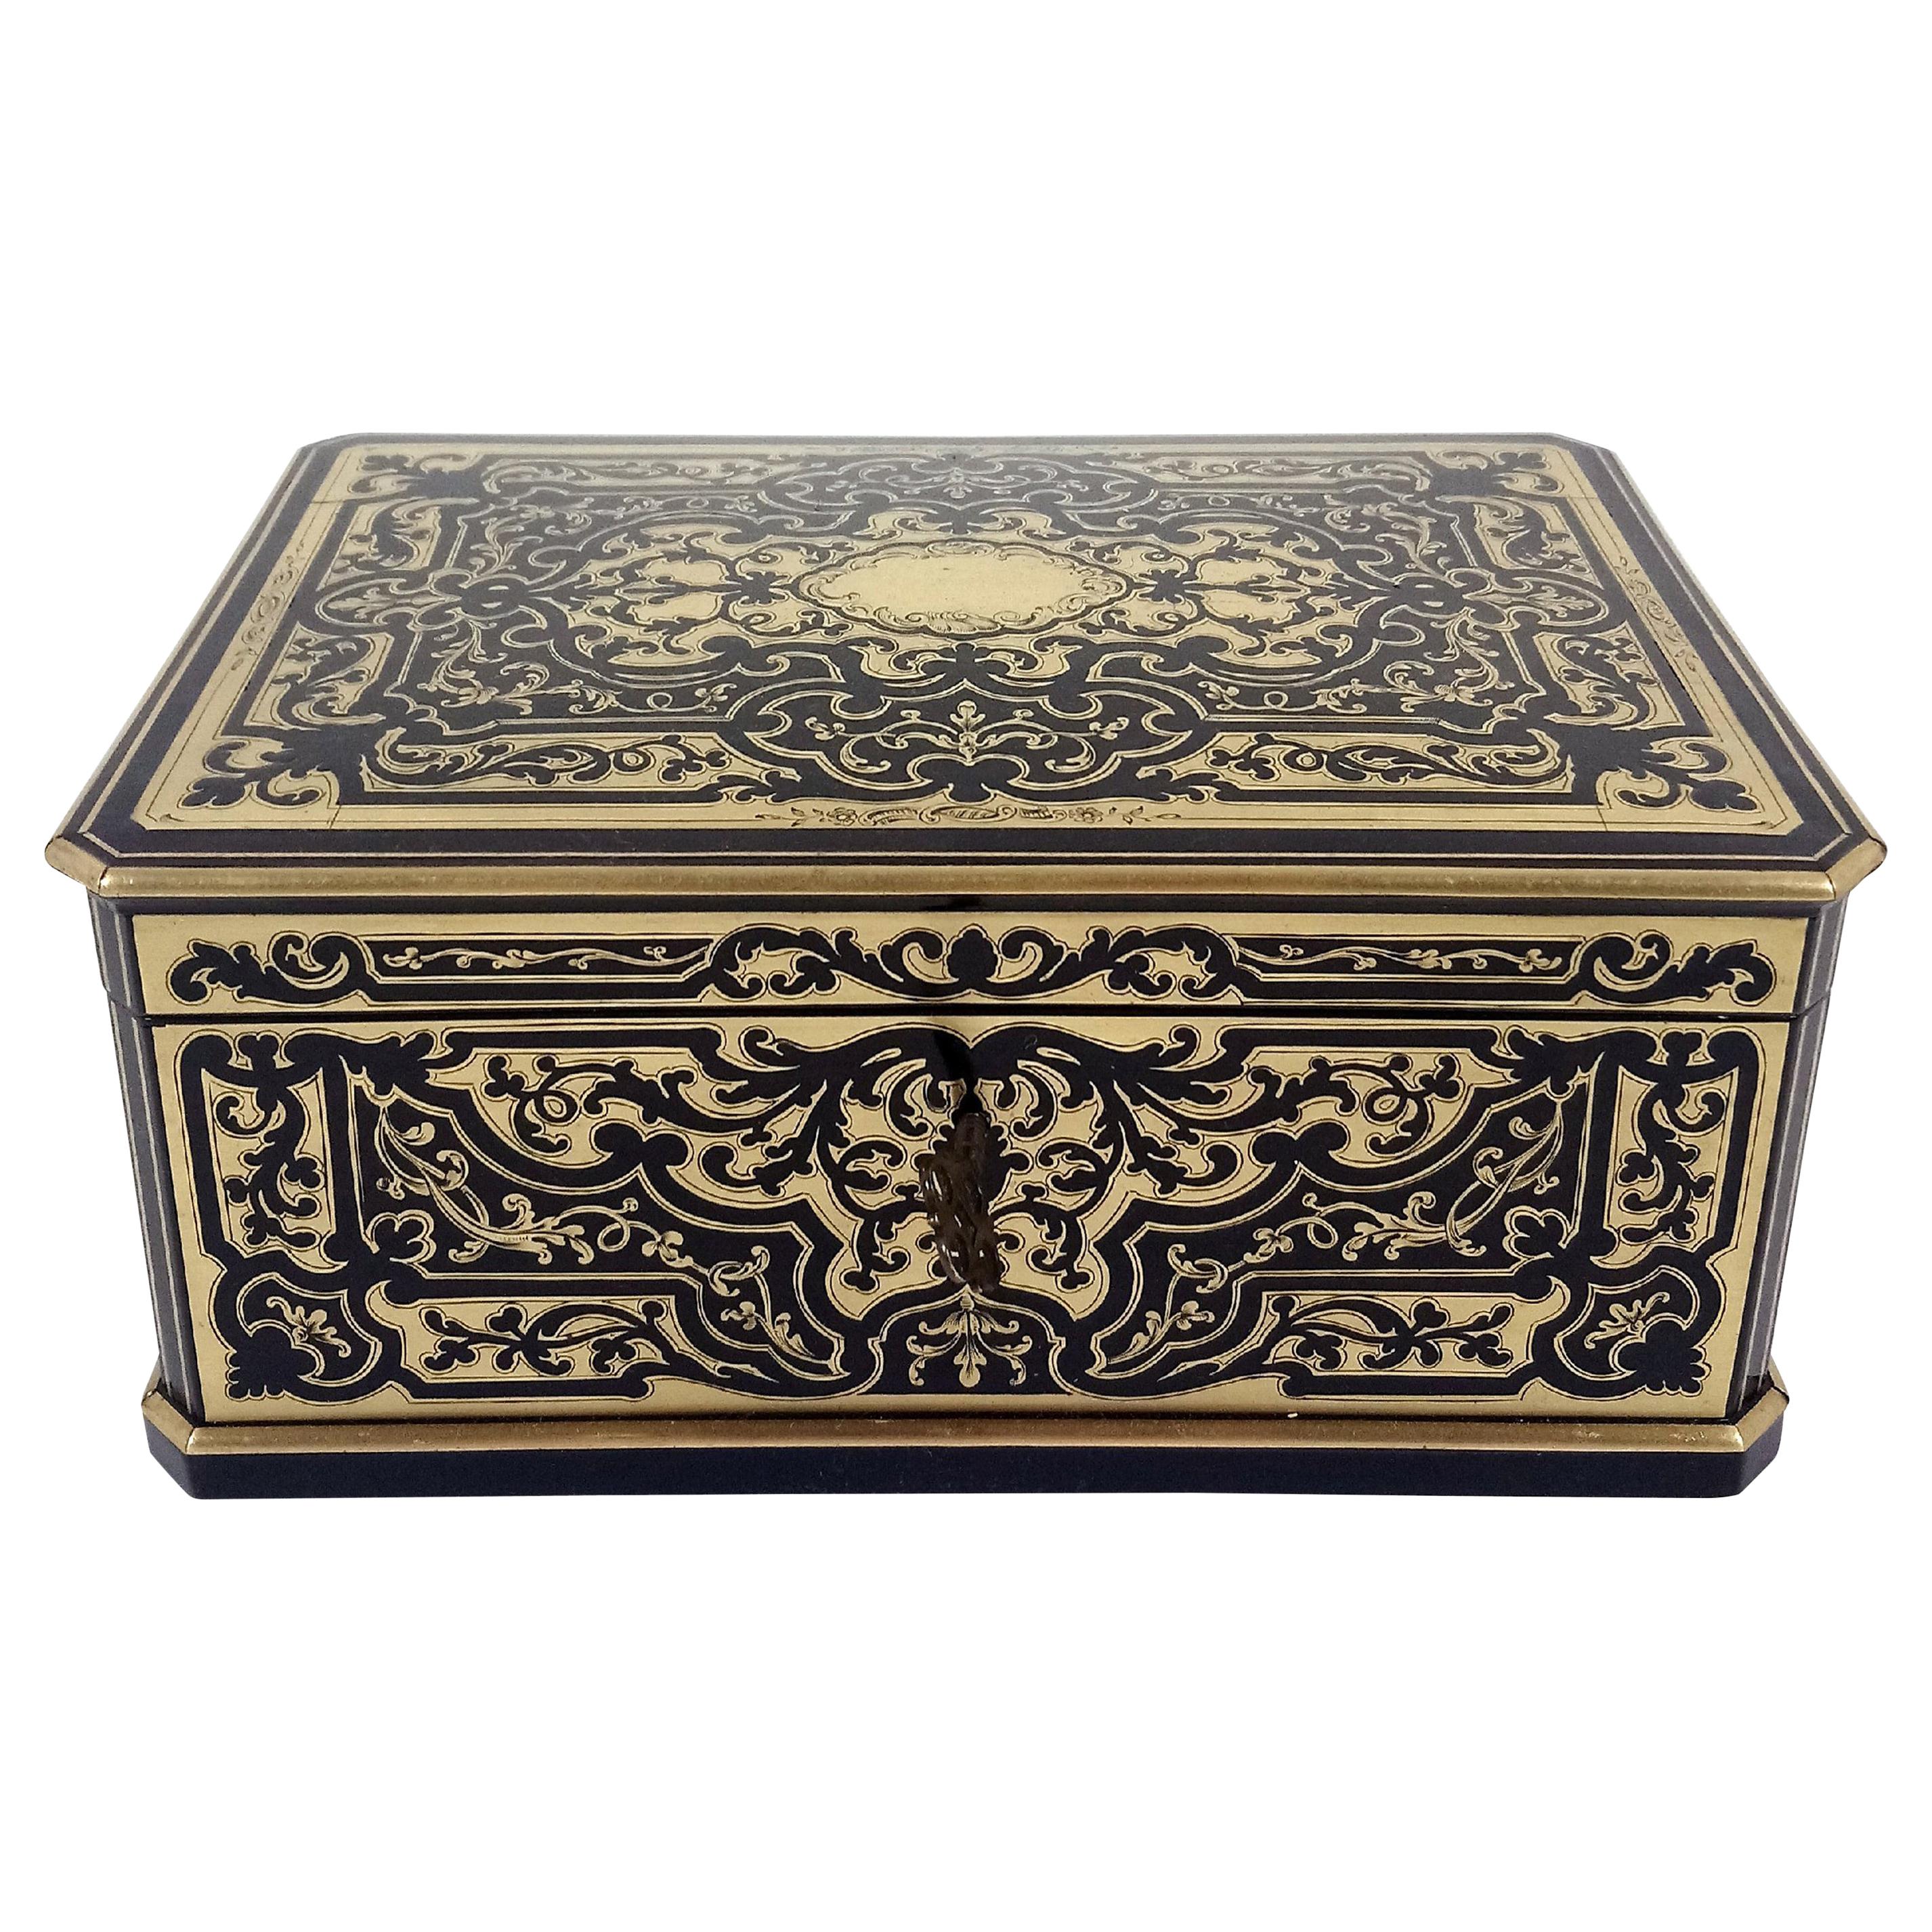 Superb Mid-19th Century French Boulle Box by Tahan, Paris